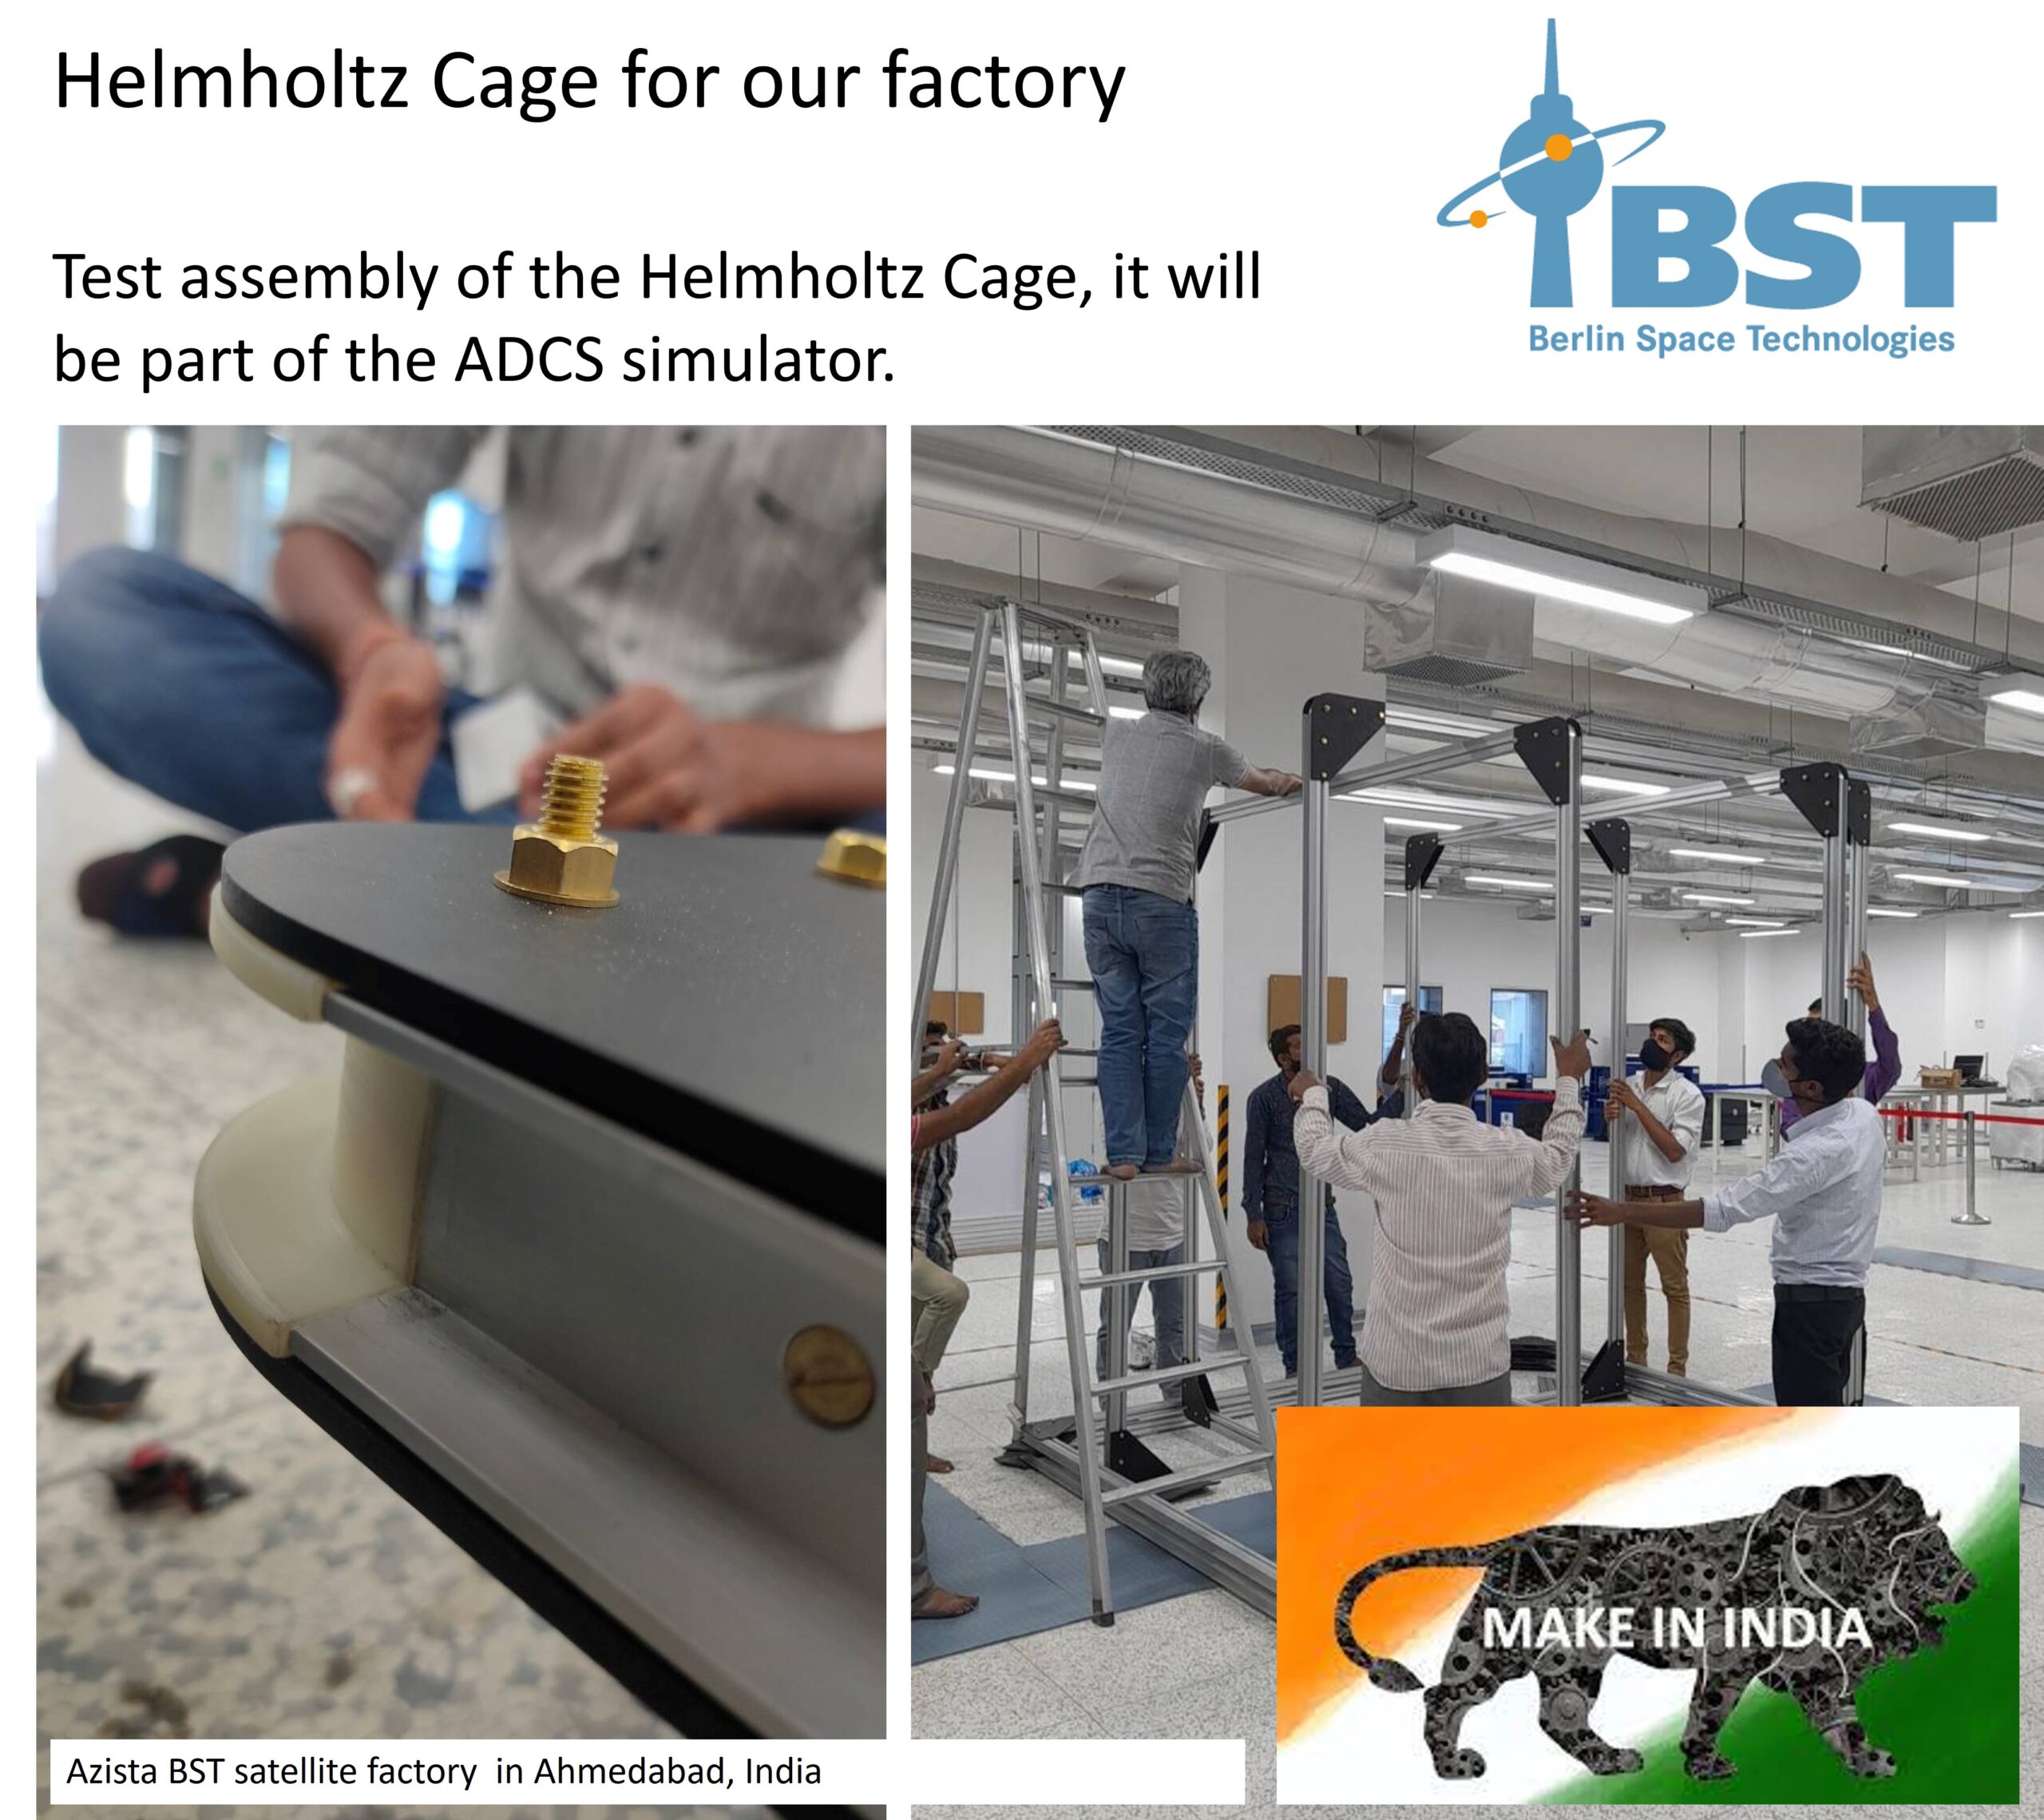 Helmholtz Cage for our Factory